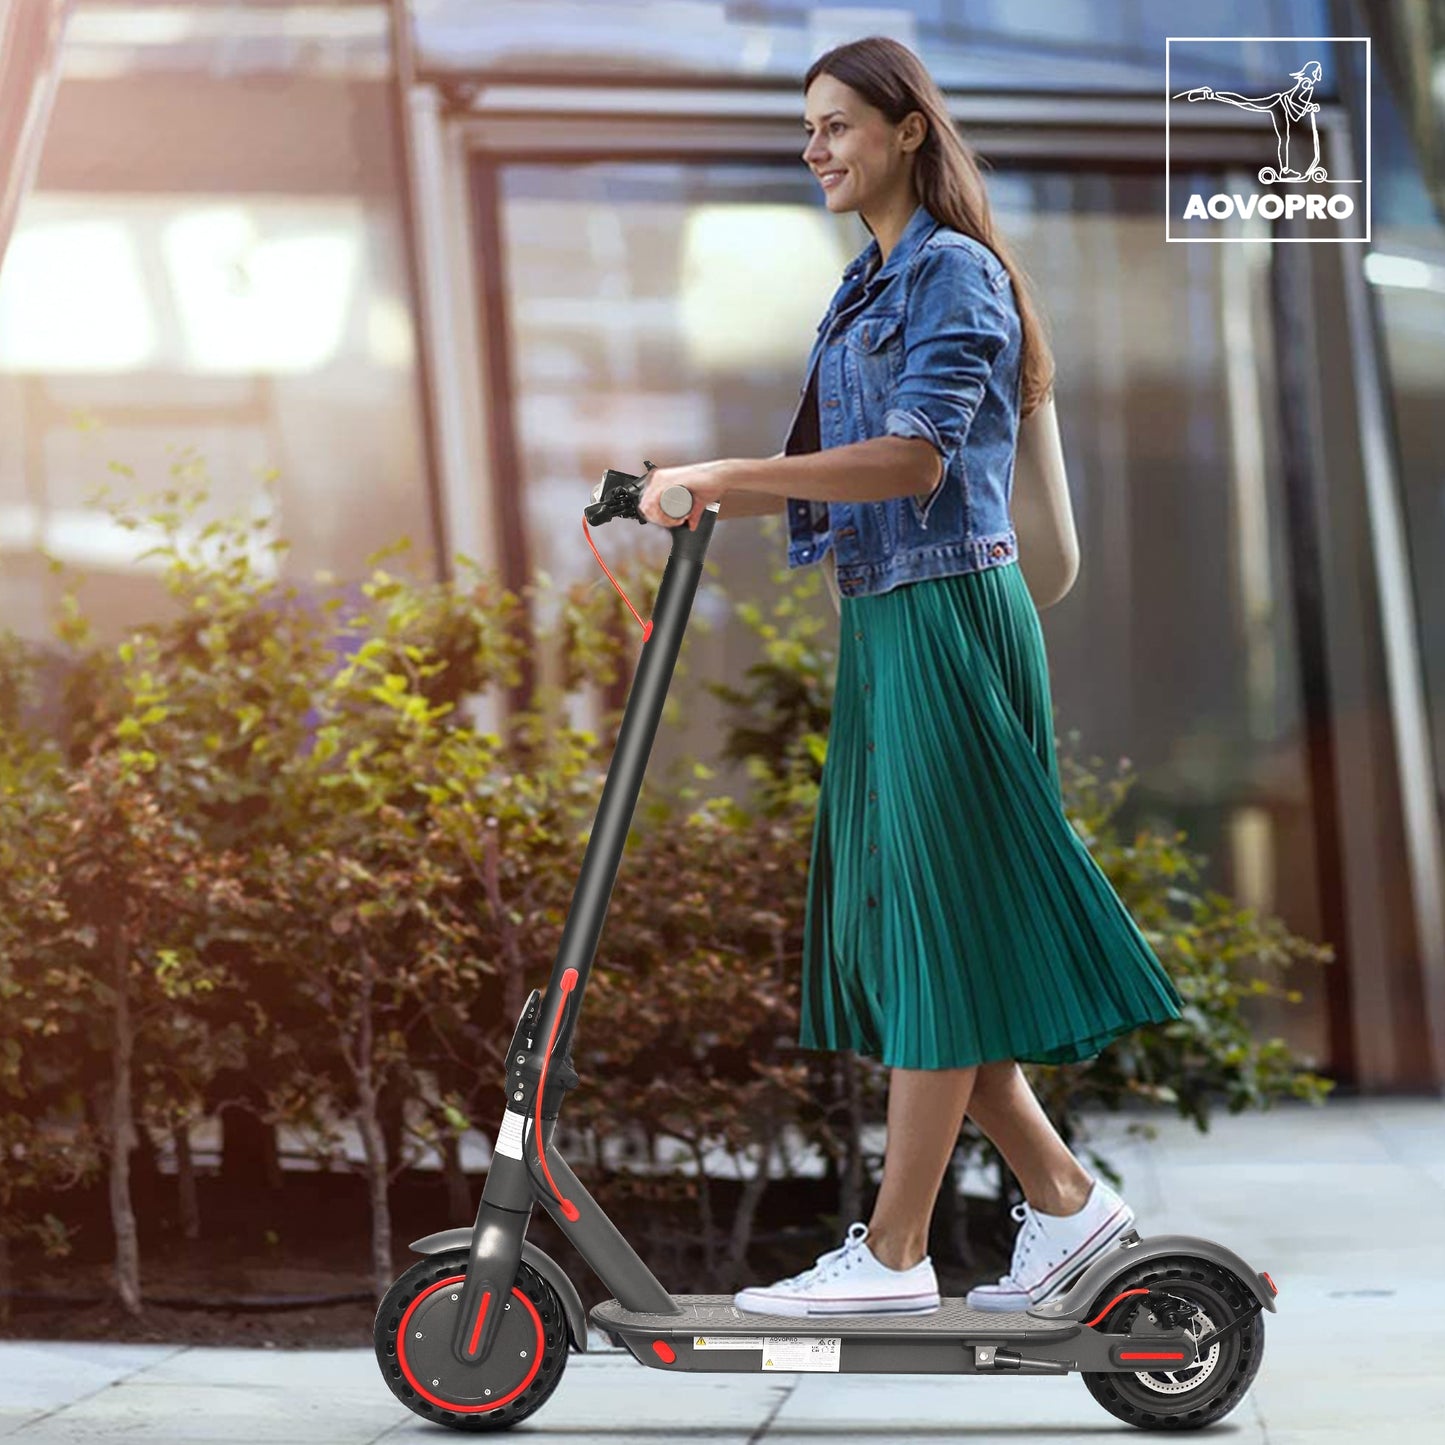 ES80 M365 Electric Scooter 350W 31km/h APP, Smart Adult Scooter, Shock Absorption, Anti-skid, Folding